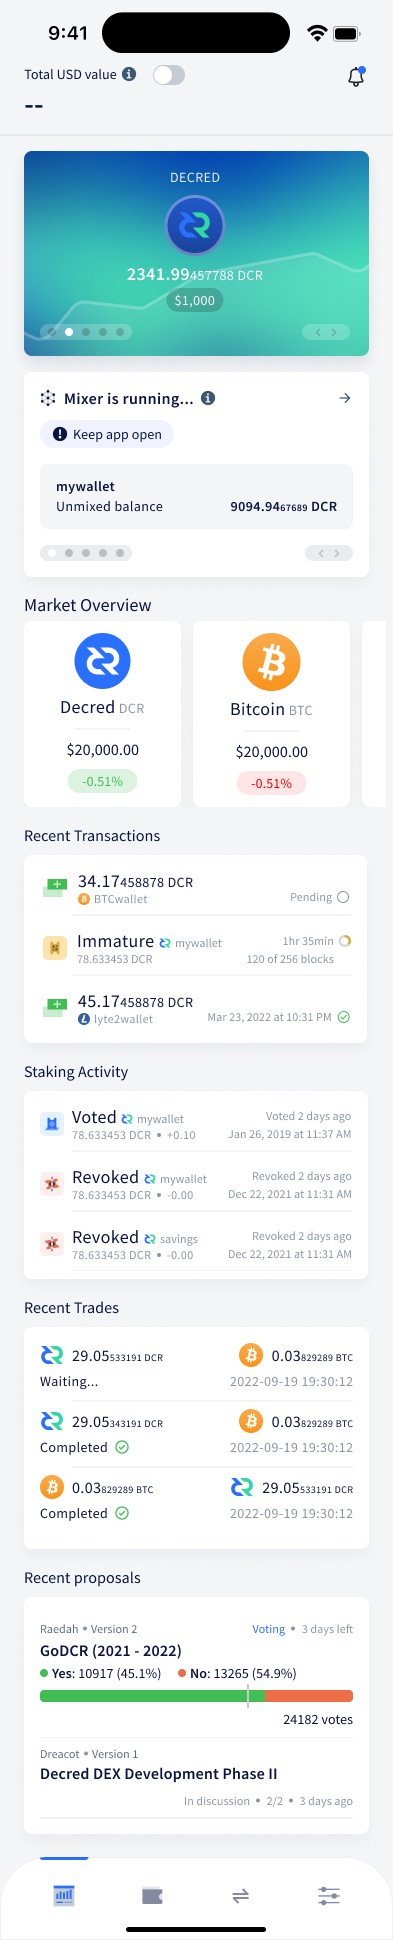 Mobile design of the Overview tab in Cryptopower (final implementation may differ)